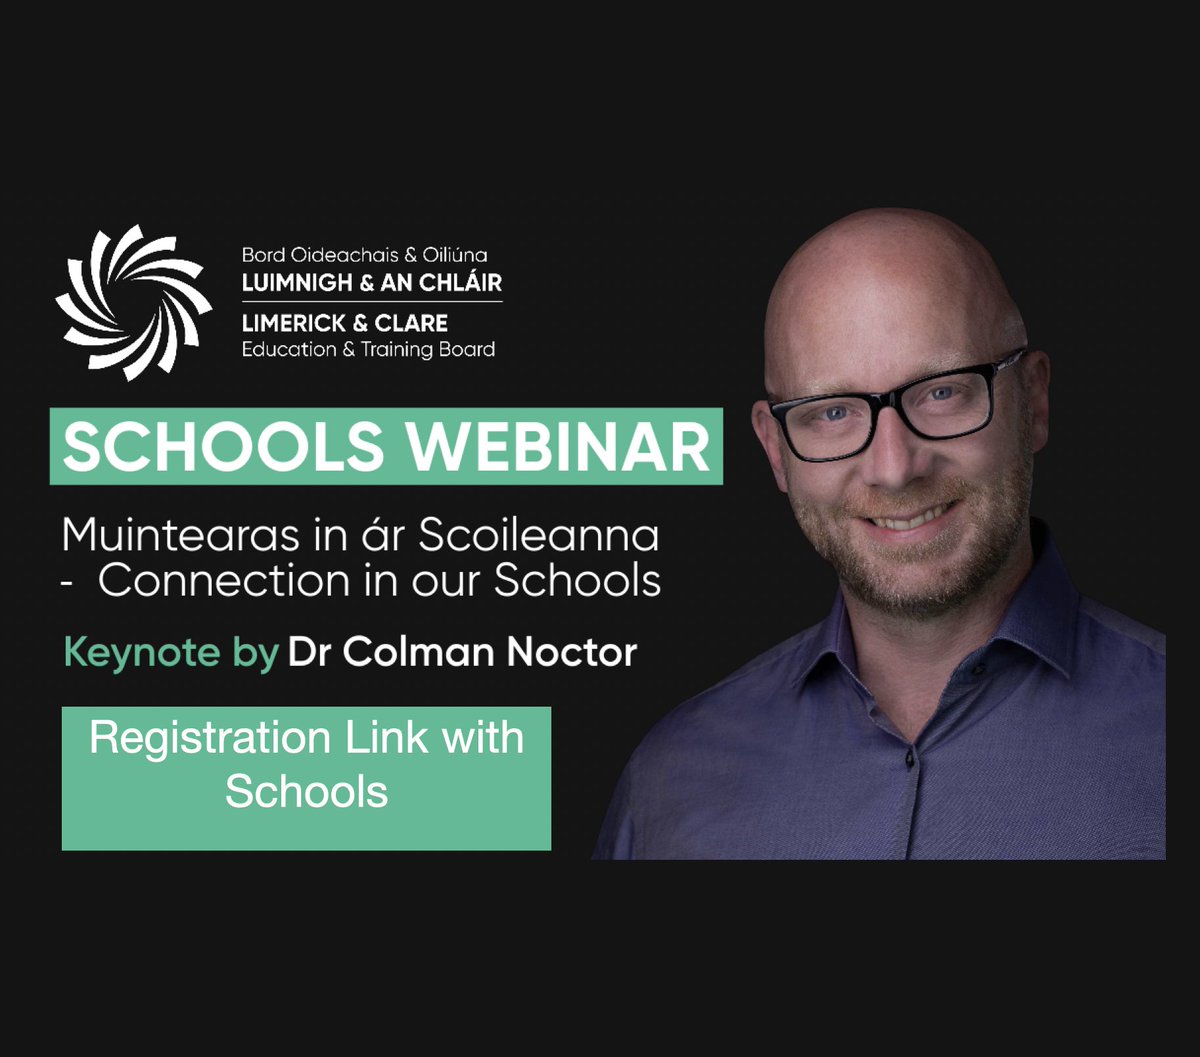 We are all looking forward to our etb-wide school webinar for all staff with the inspirational and world-class speaker @colnoc77 - Registration details with our Community National Schools, Community Colleges and Community Schools @LimClareETB